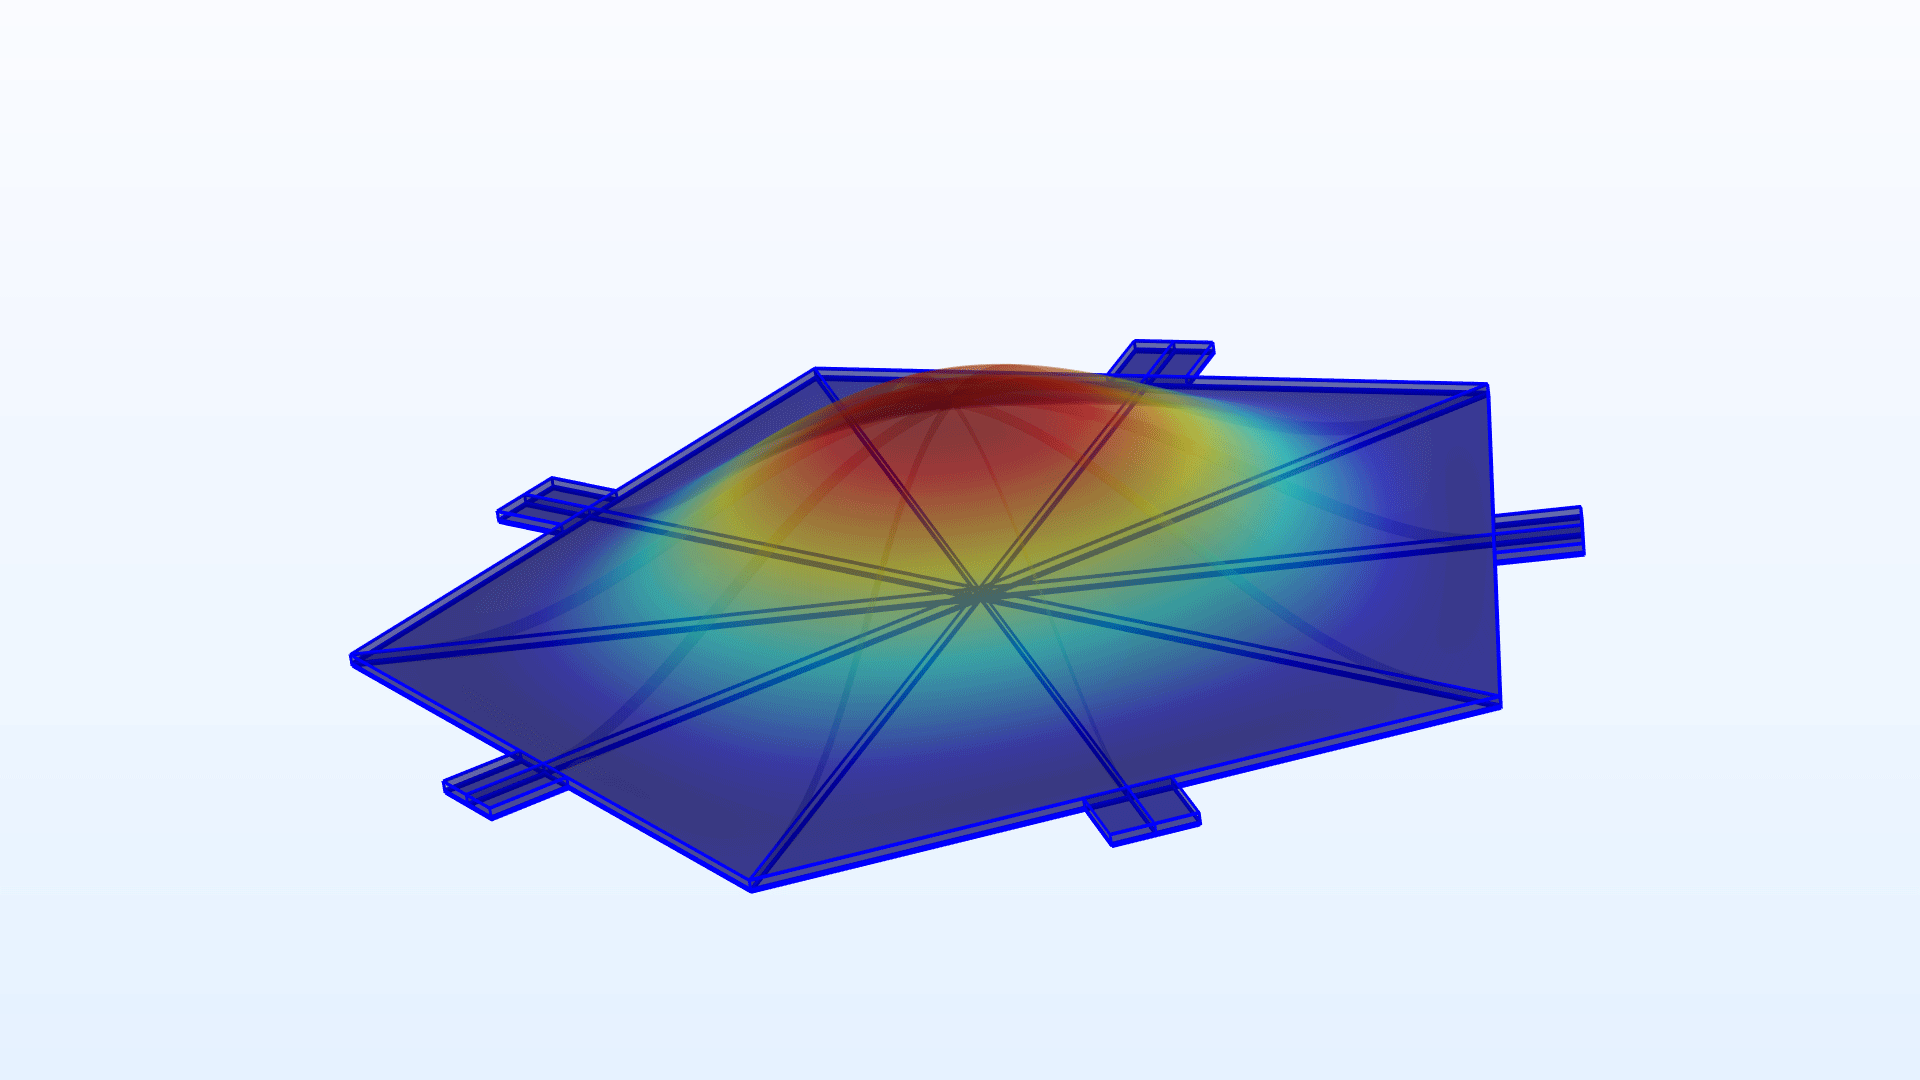 A resonator model showing the thickness-extension mode in the Rainbow color table.